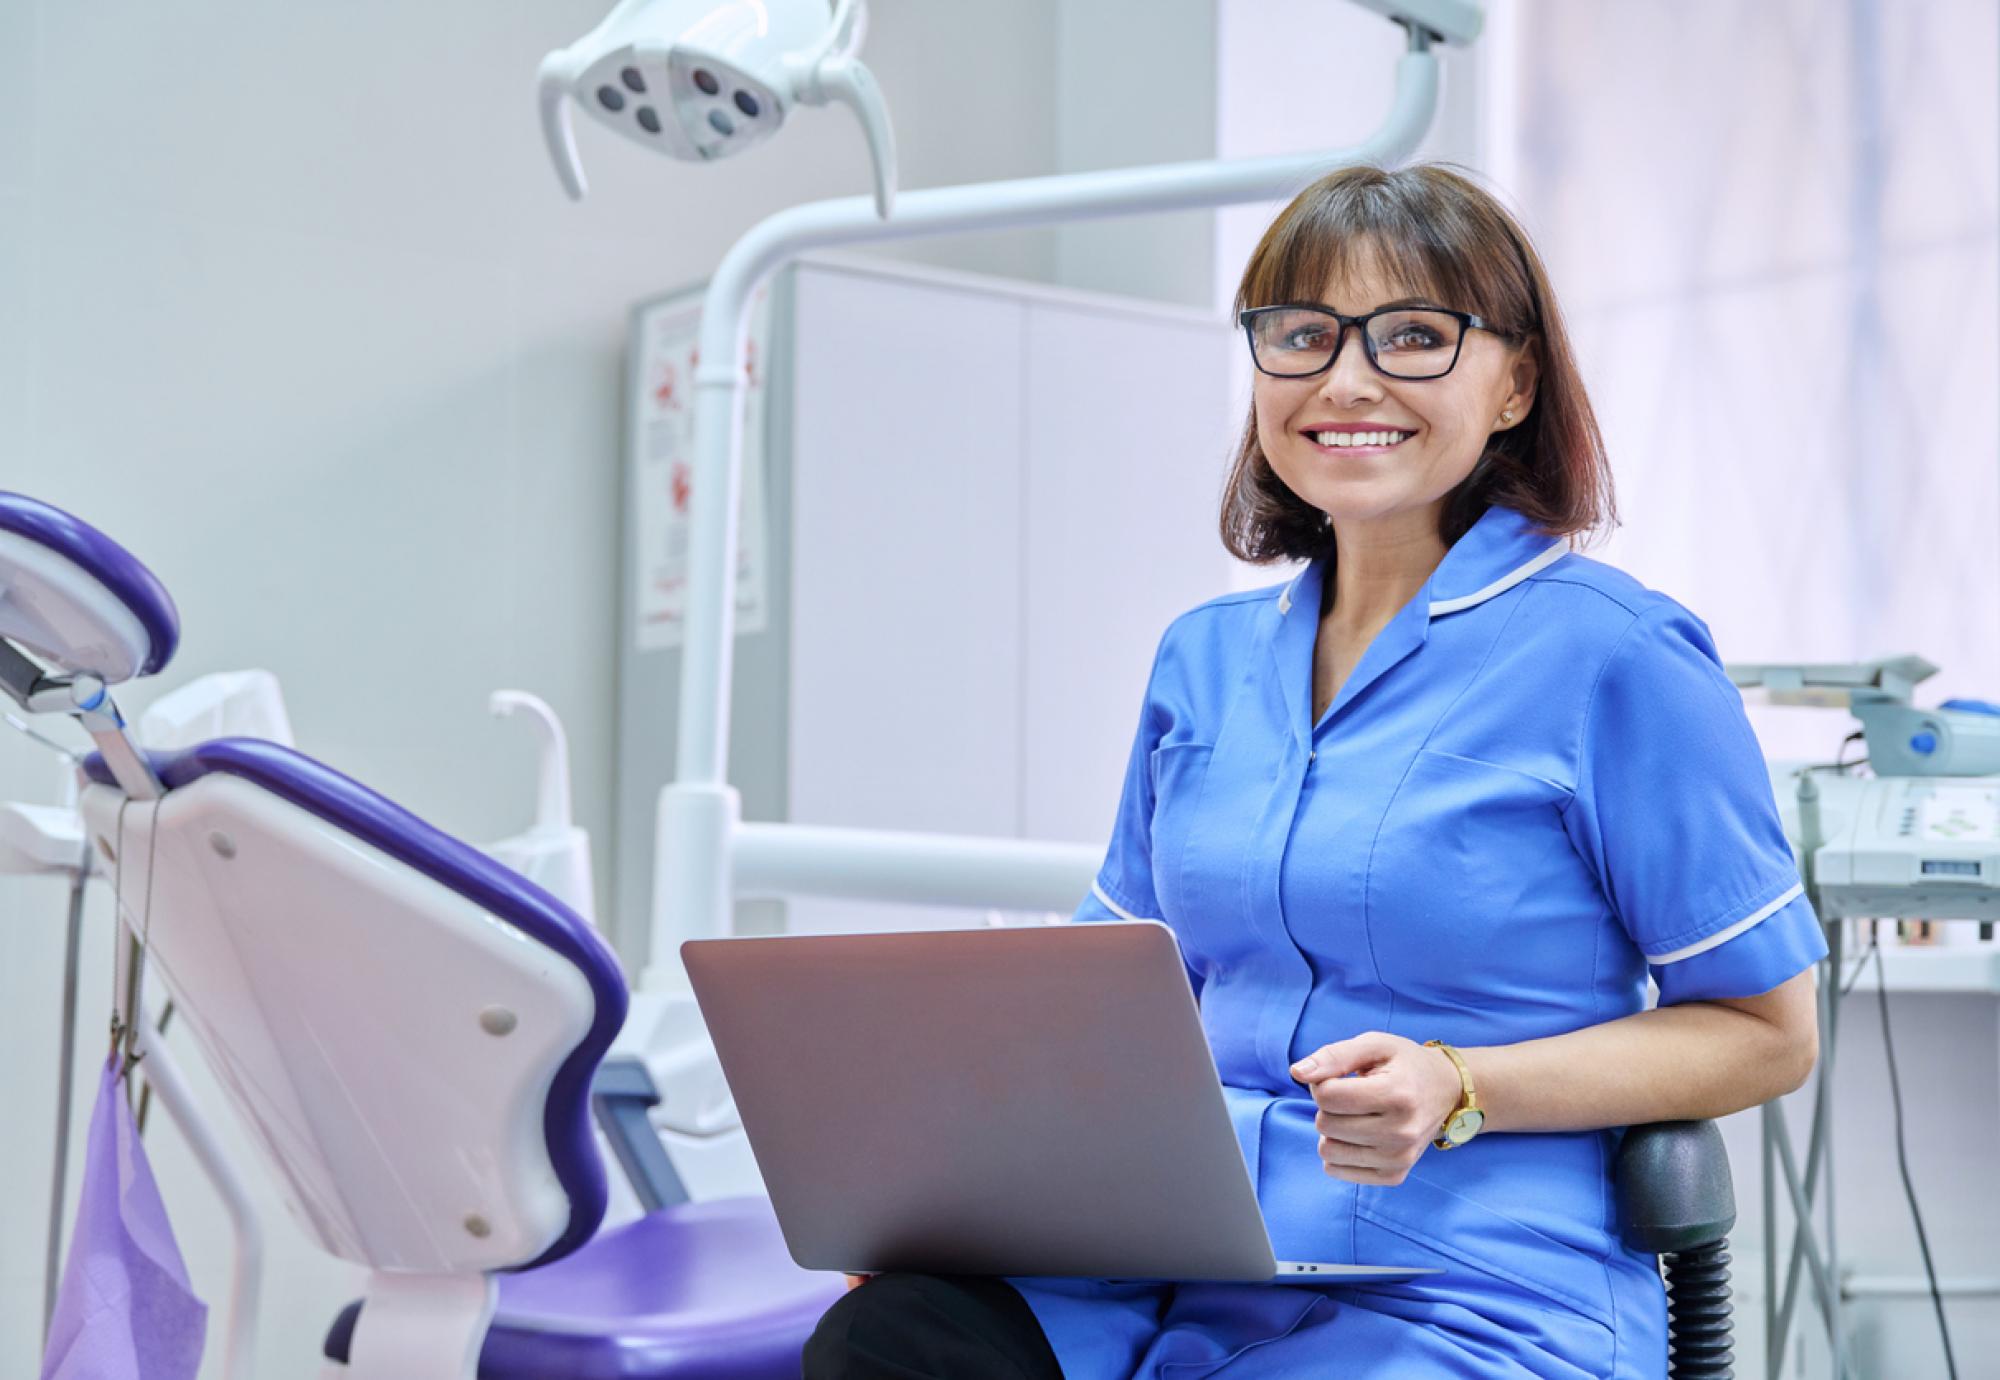 Improved access to NHS dental services after new reforms announced | UK